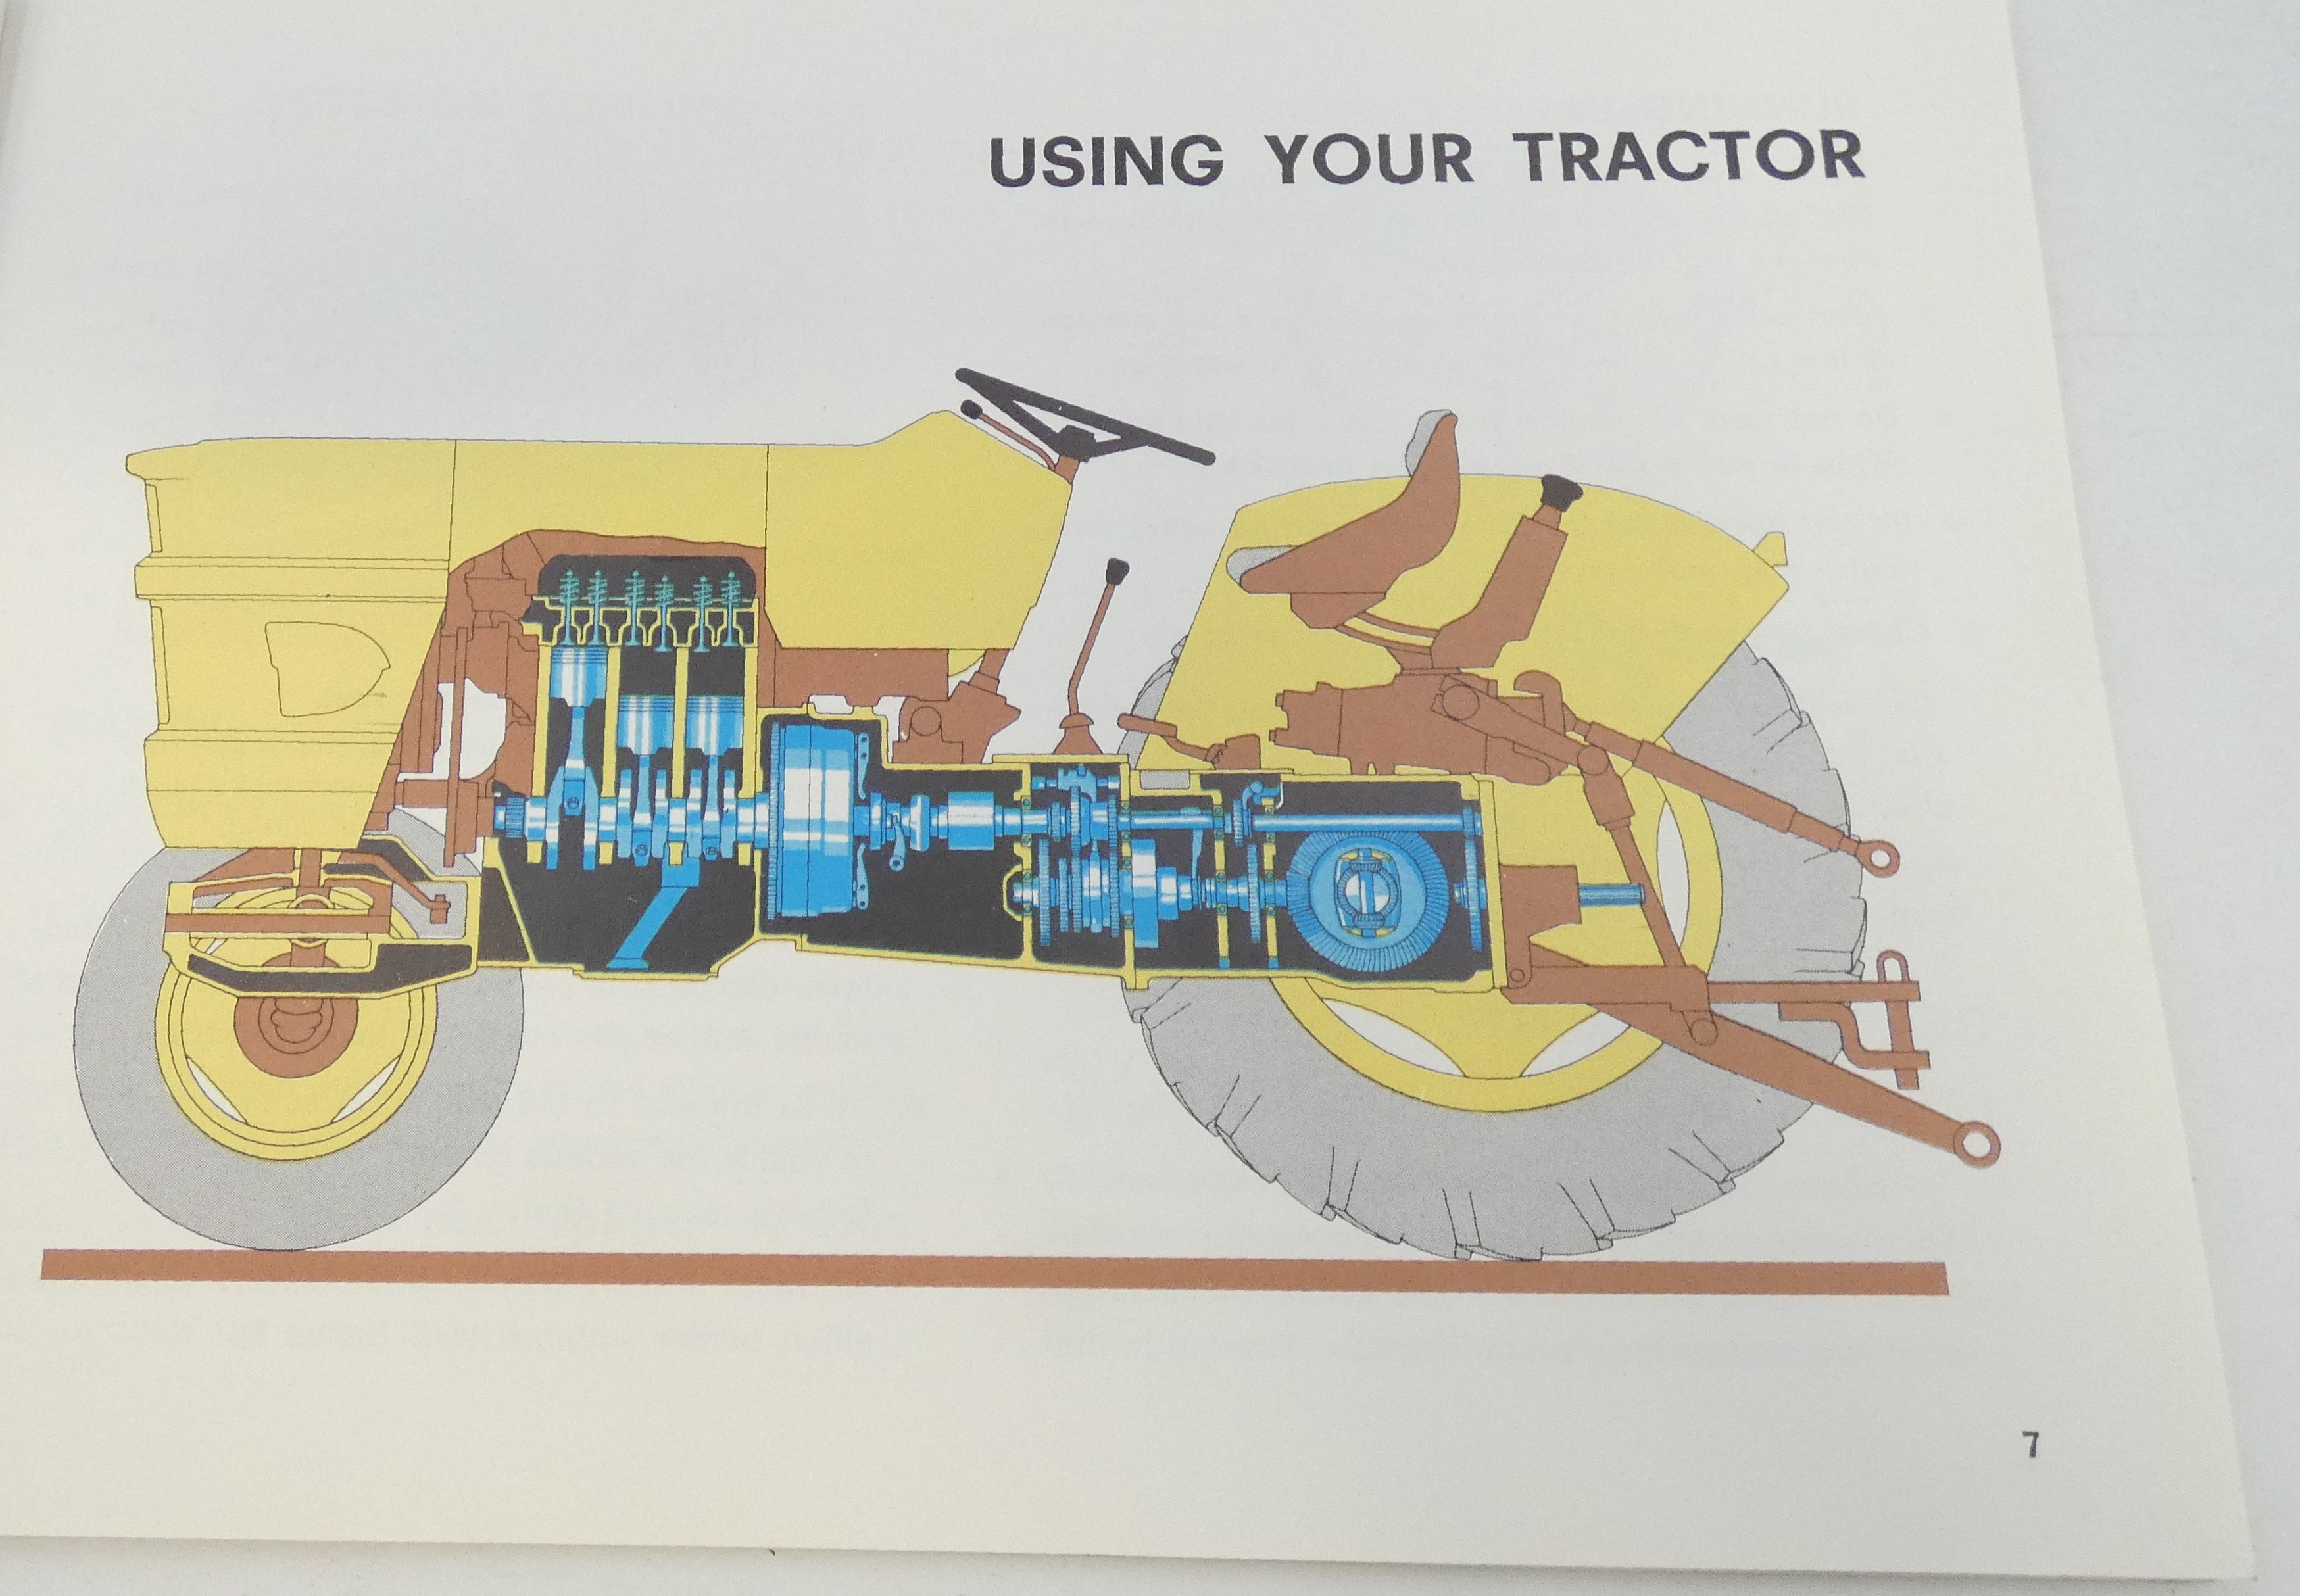 Fiat - you and your tractor